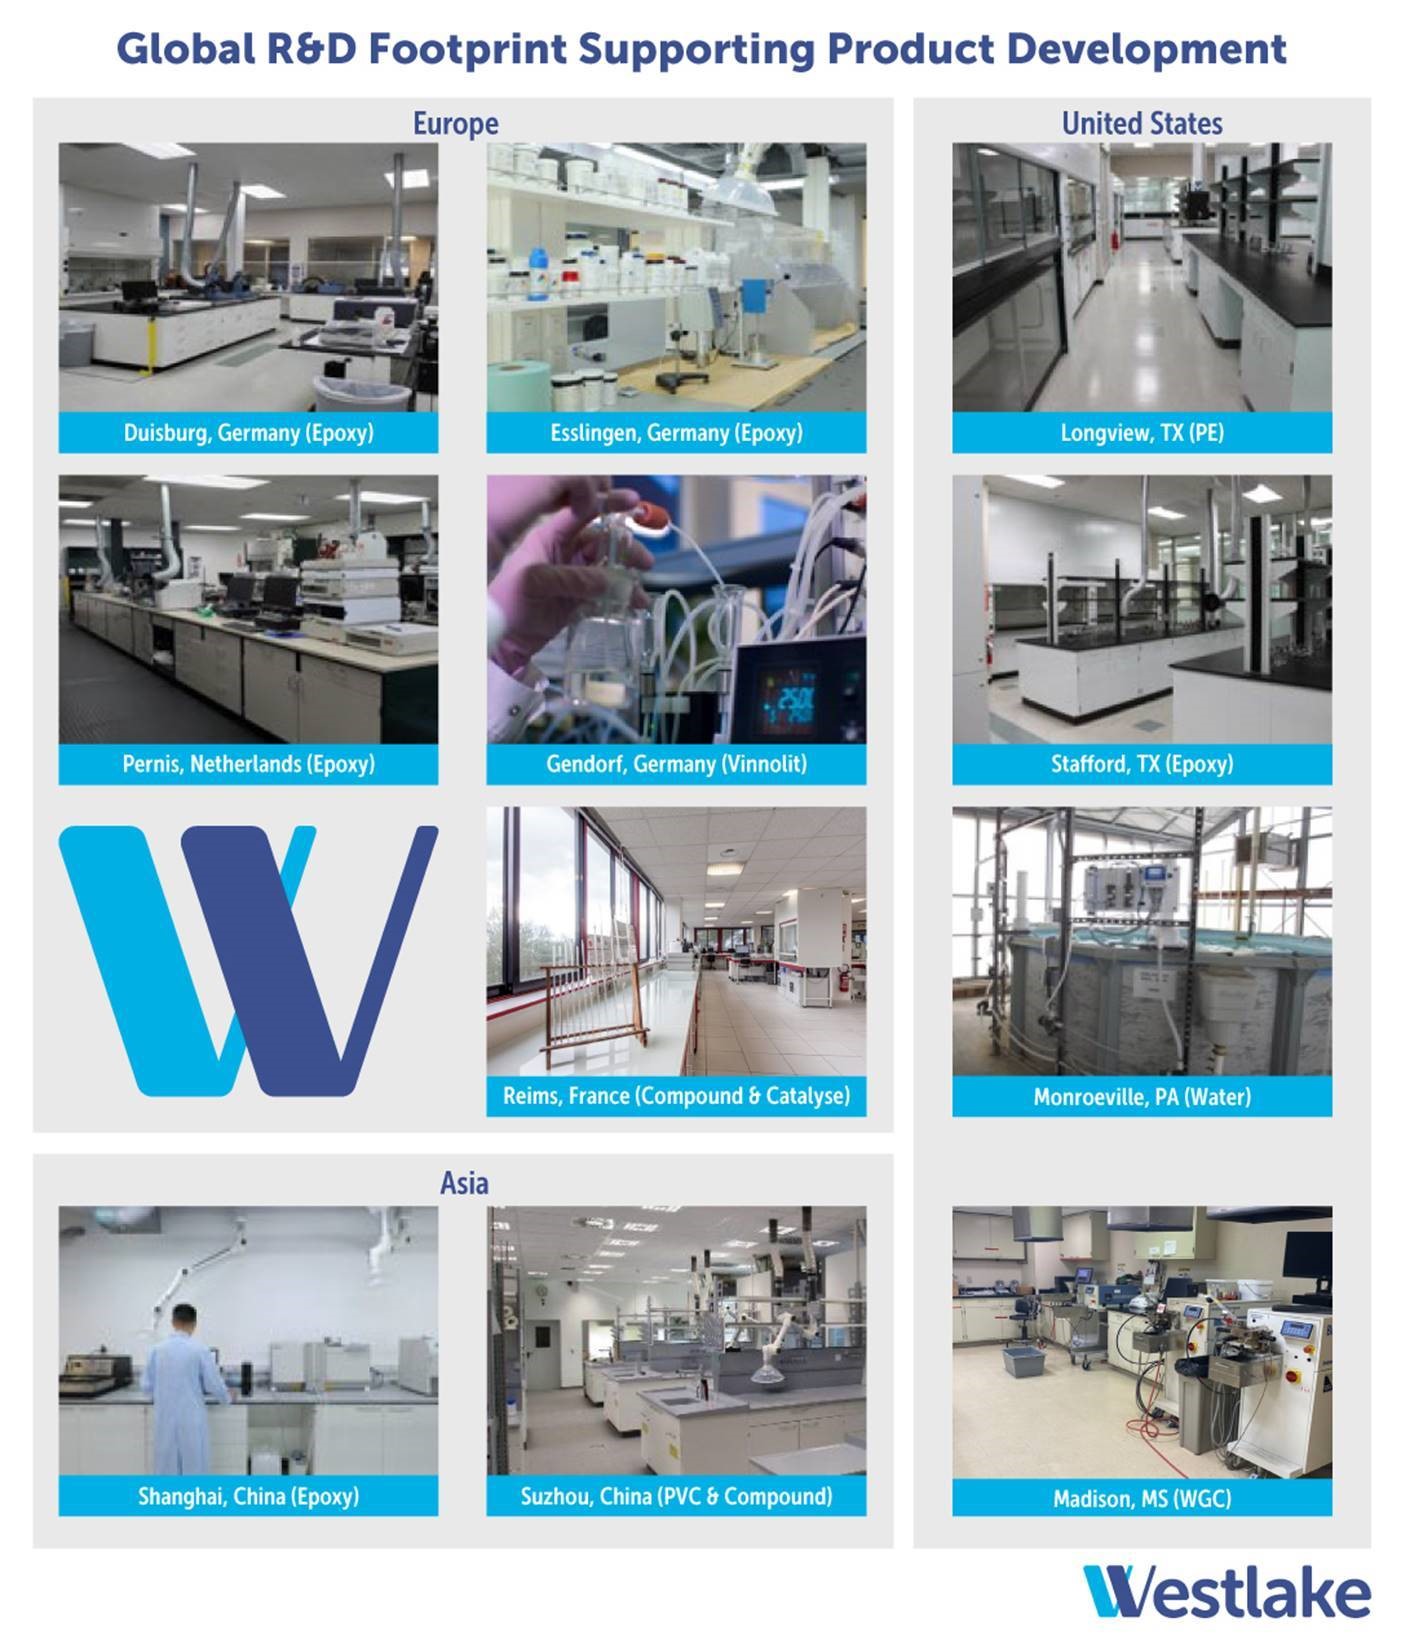 The company has 11 R&D labs located on three continents to support customers in both the Performance and Essential Materials and Housing and Infrastructure Products segments, including specialty polyethylene, PVC, epoxy resins and vinyl compounds.